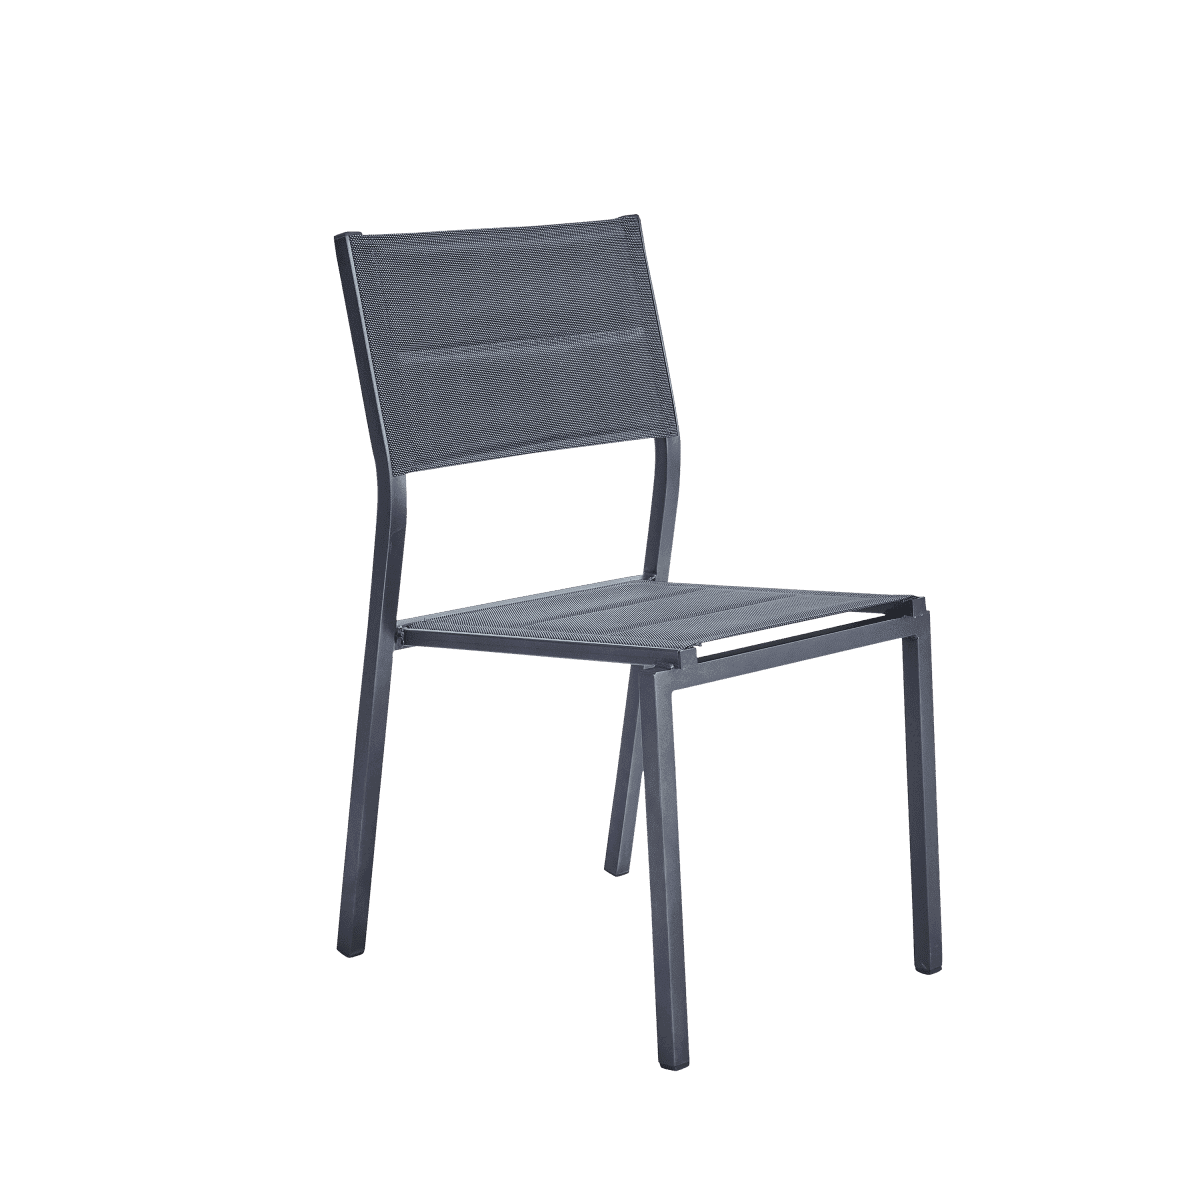 ORION BETA II NATERIAL ALUMINIUM AND TEXTILENE UPHOLSTERED ANTHRACITE CHAIR